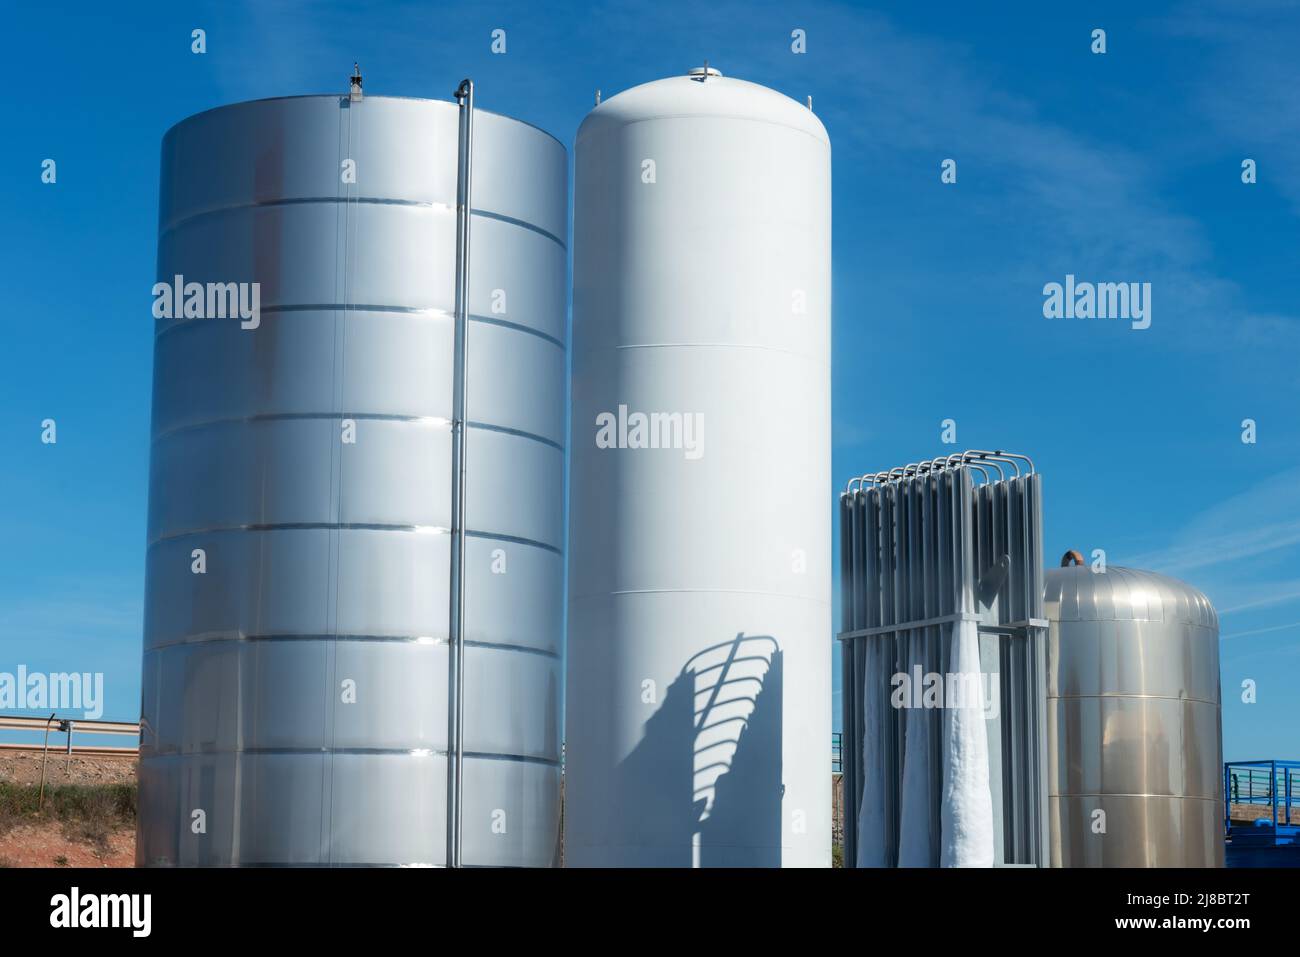 Several tanks for the storage of liquids, one of them for cryogenic gases. Stock Photo